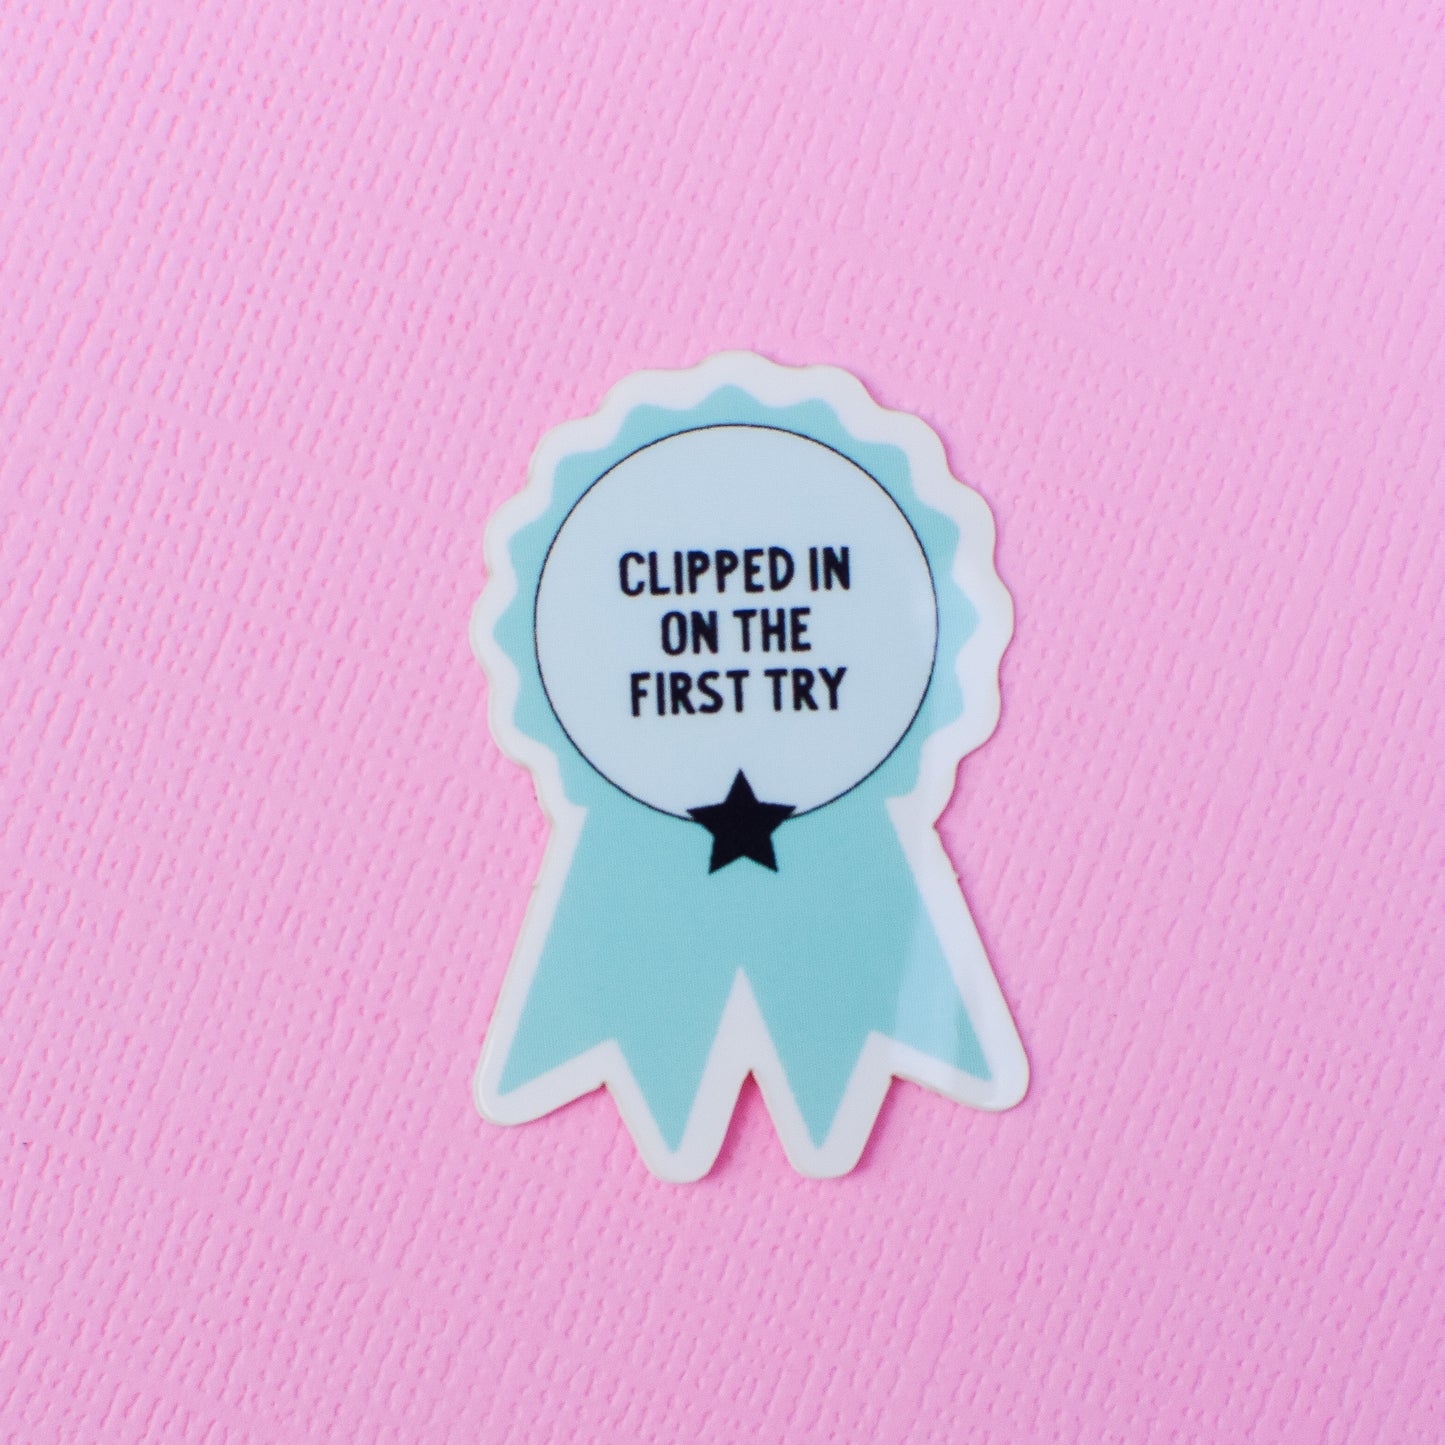 Clipped in on the First Try Award Sticker